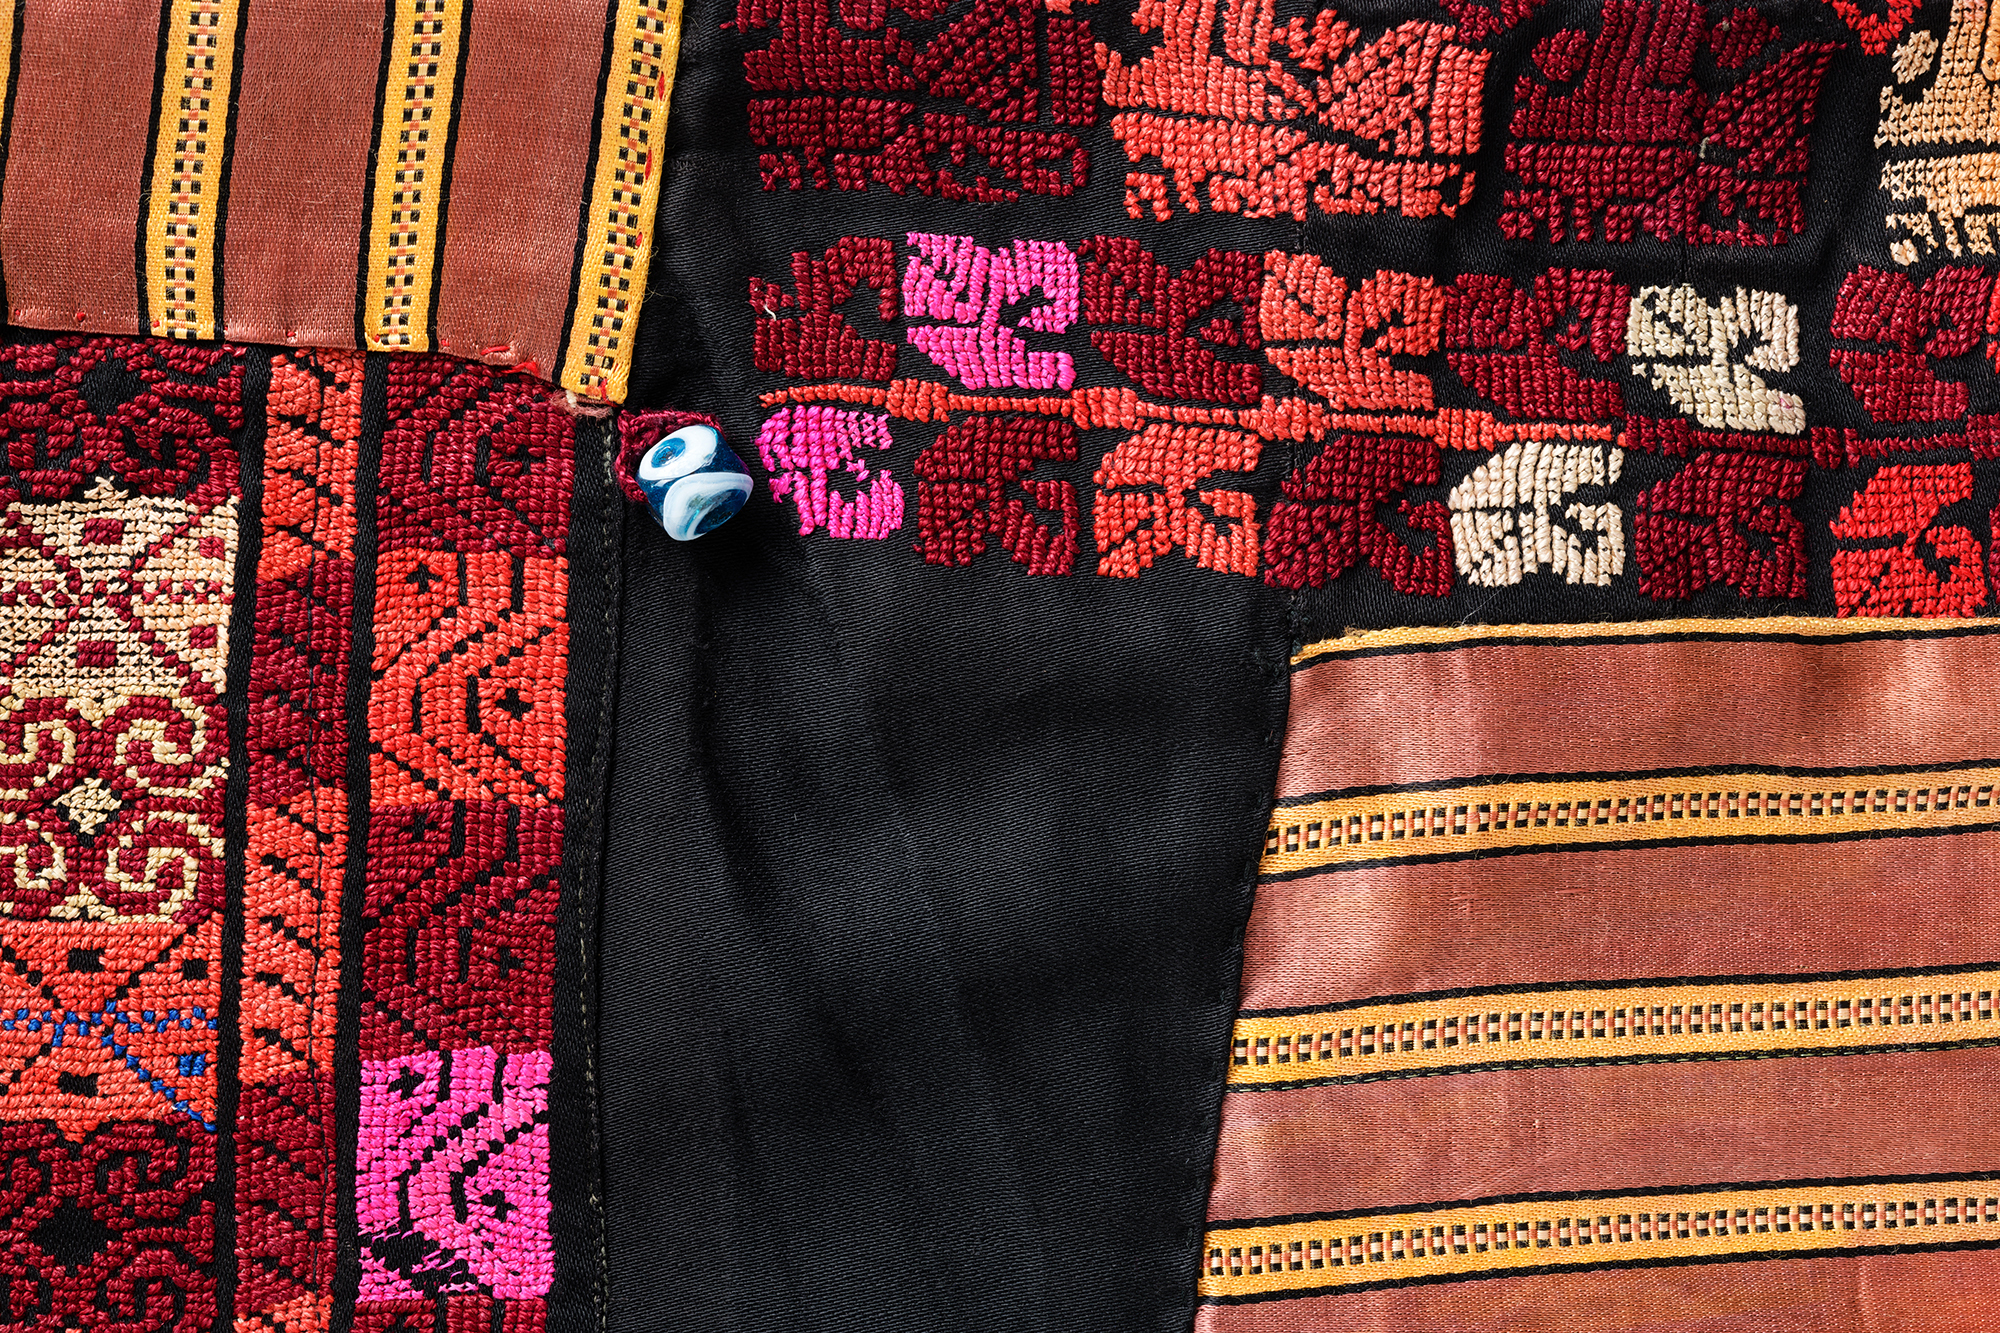 Amulets and beads protect against the evil eye and were often sewn onto Bedouin clothing. Close-up of the dress. Region of origin: Negev-North Sinai (border region with Egypt), ca. 1945.